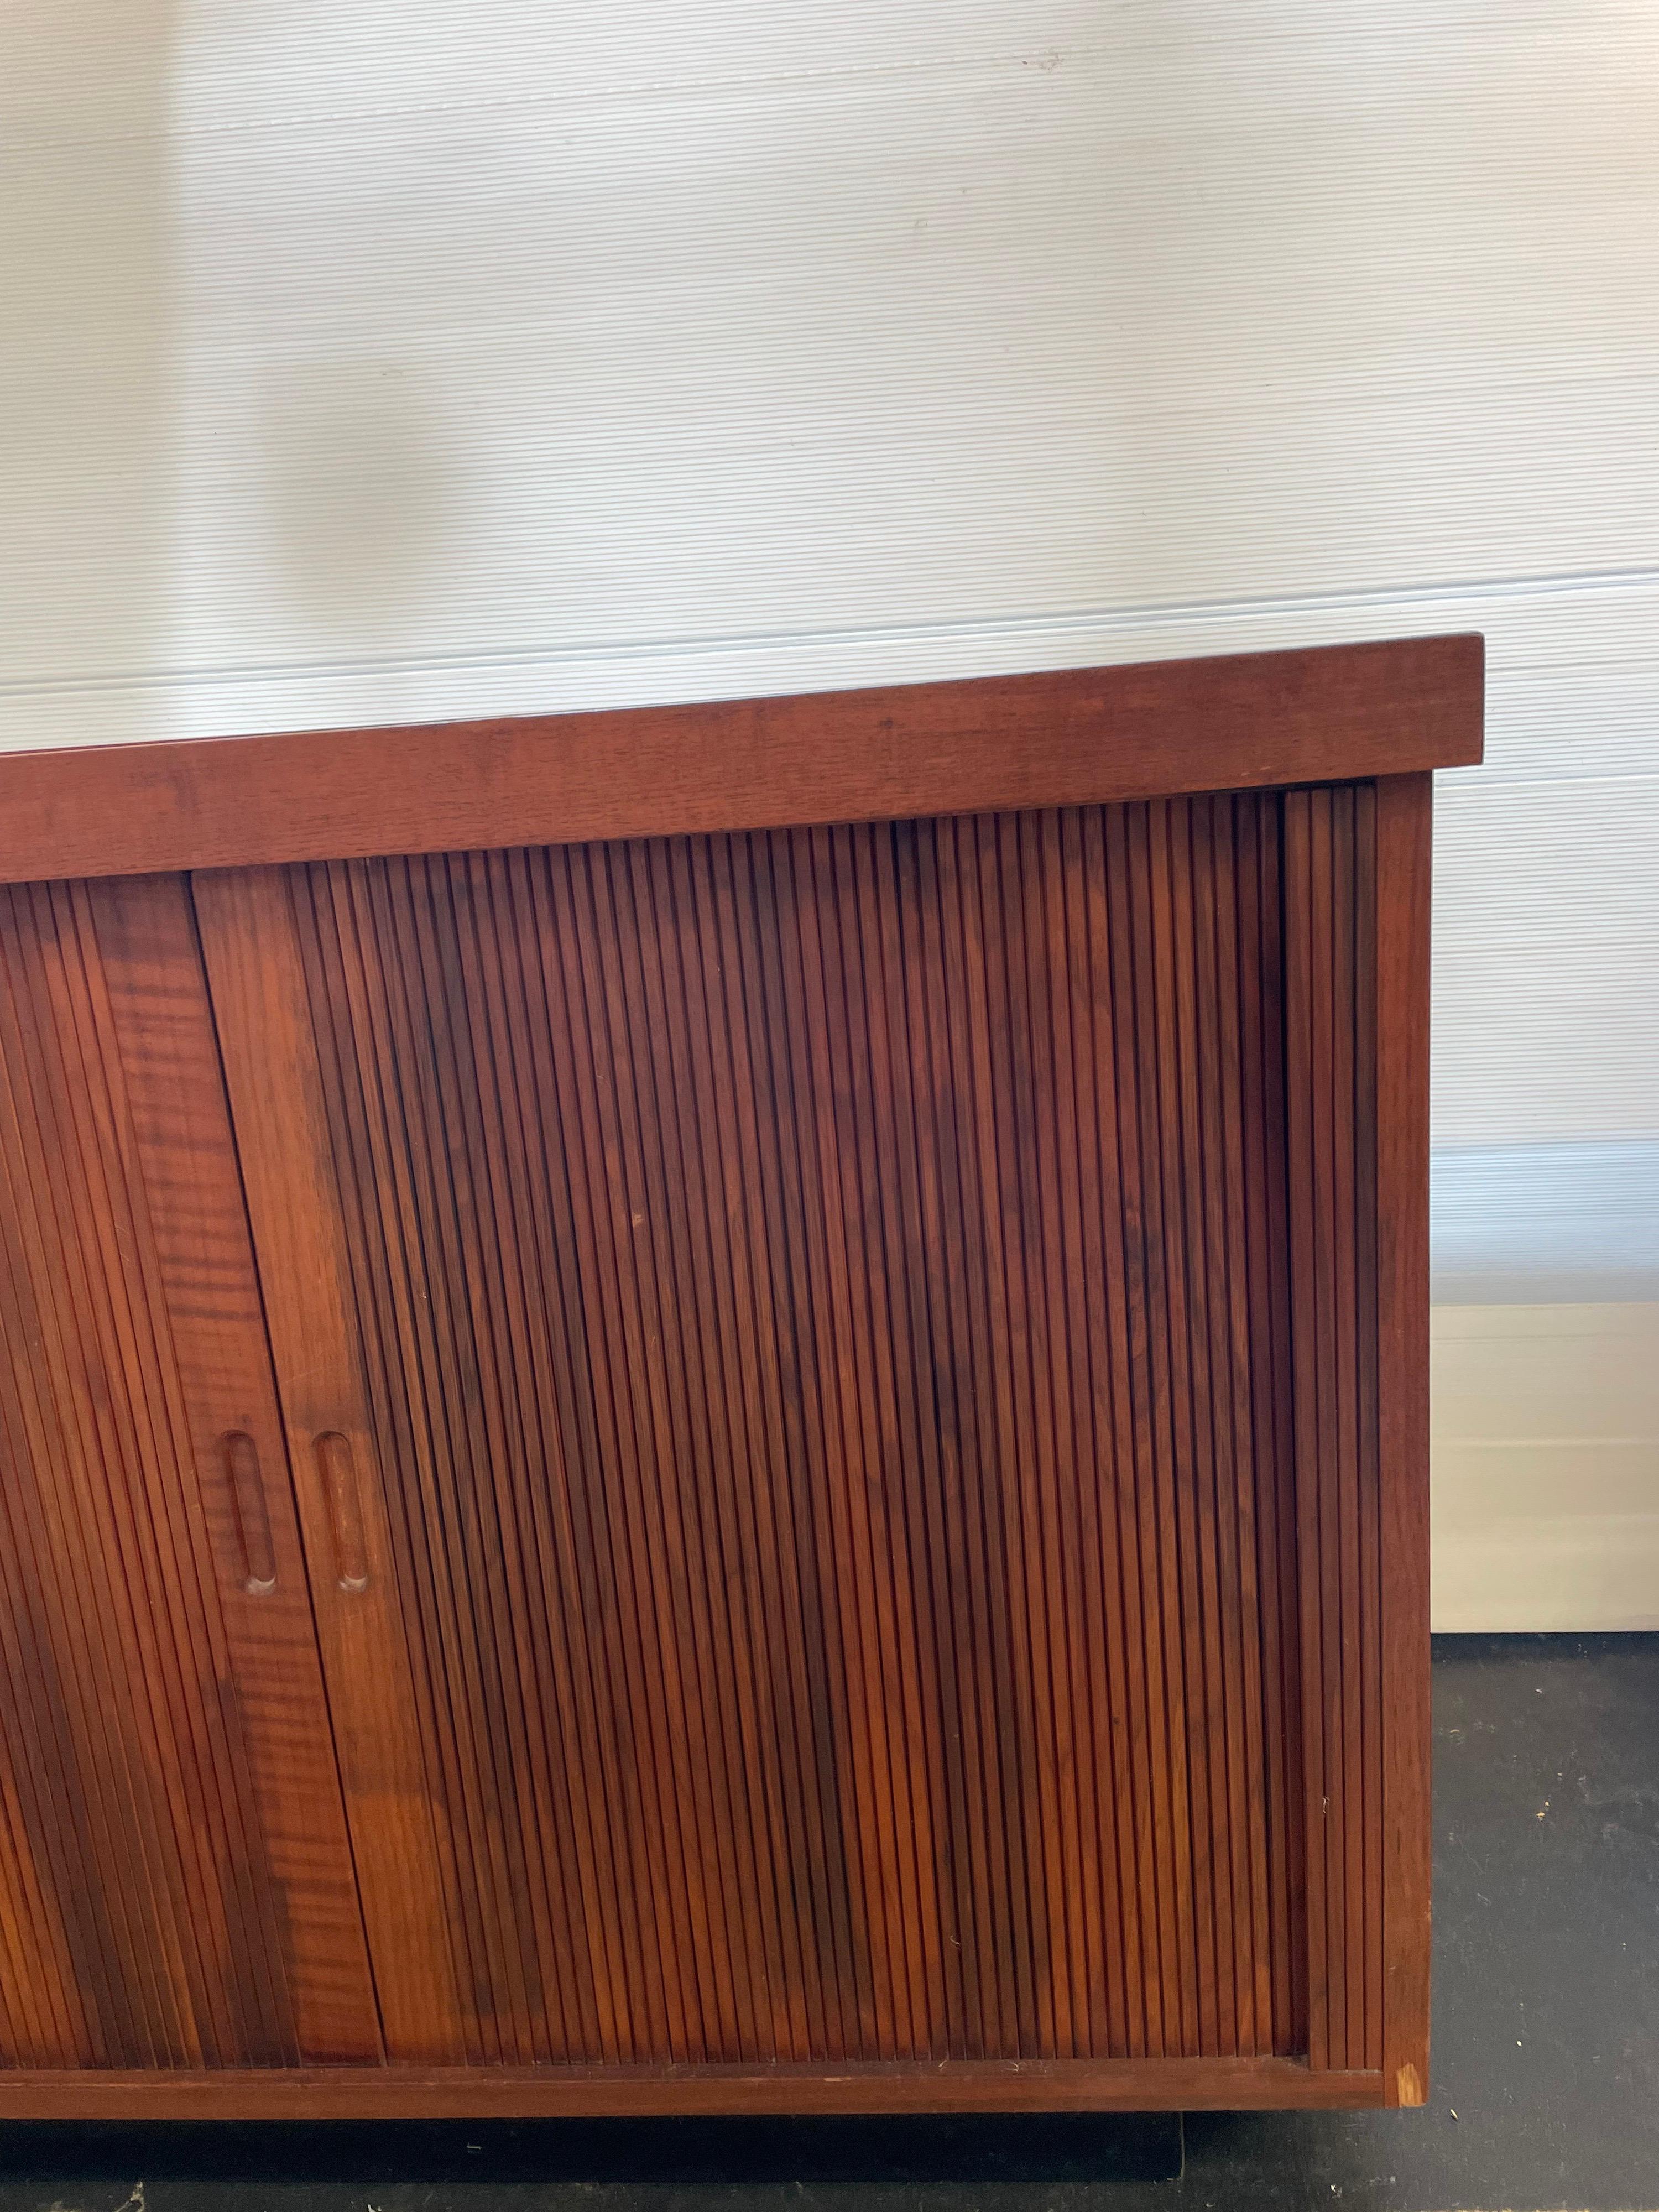 Vintage Mid-Century Modern credenza designed by Milo Baughman for Glenn of California in the United States c. 1950s. Comprised of walnut wood, this credenza has 2 sets of tambour doors with recessed pulls that reveal a compartment divided by a